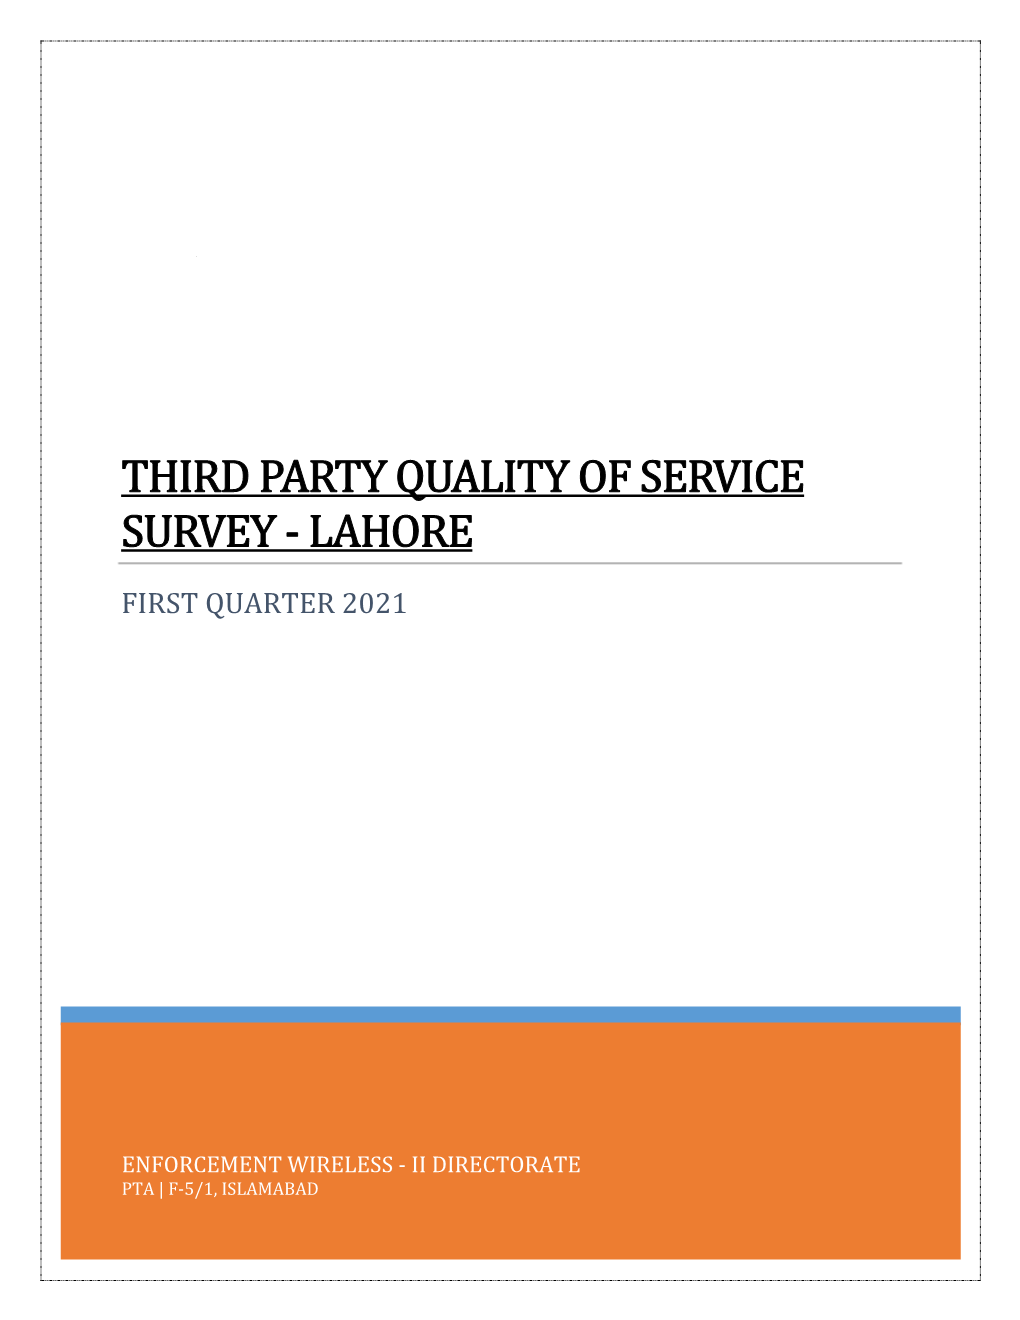 Third Party Quality of Service Survey - Lahore First Quarter 2021